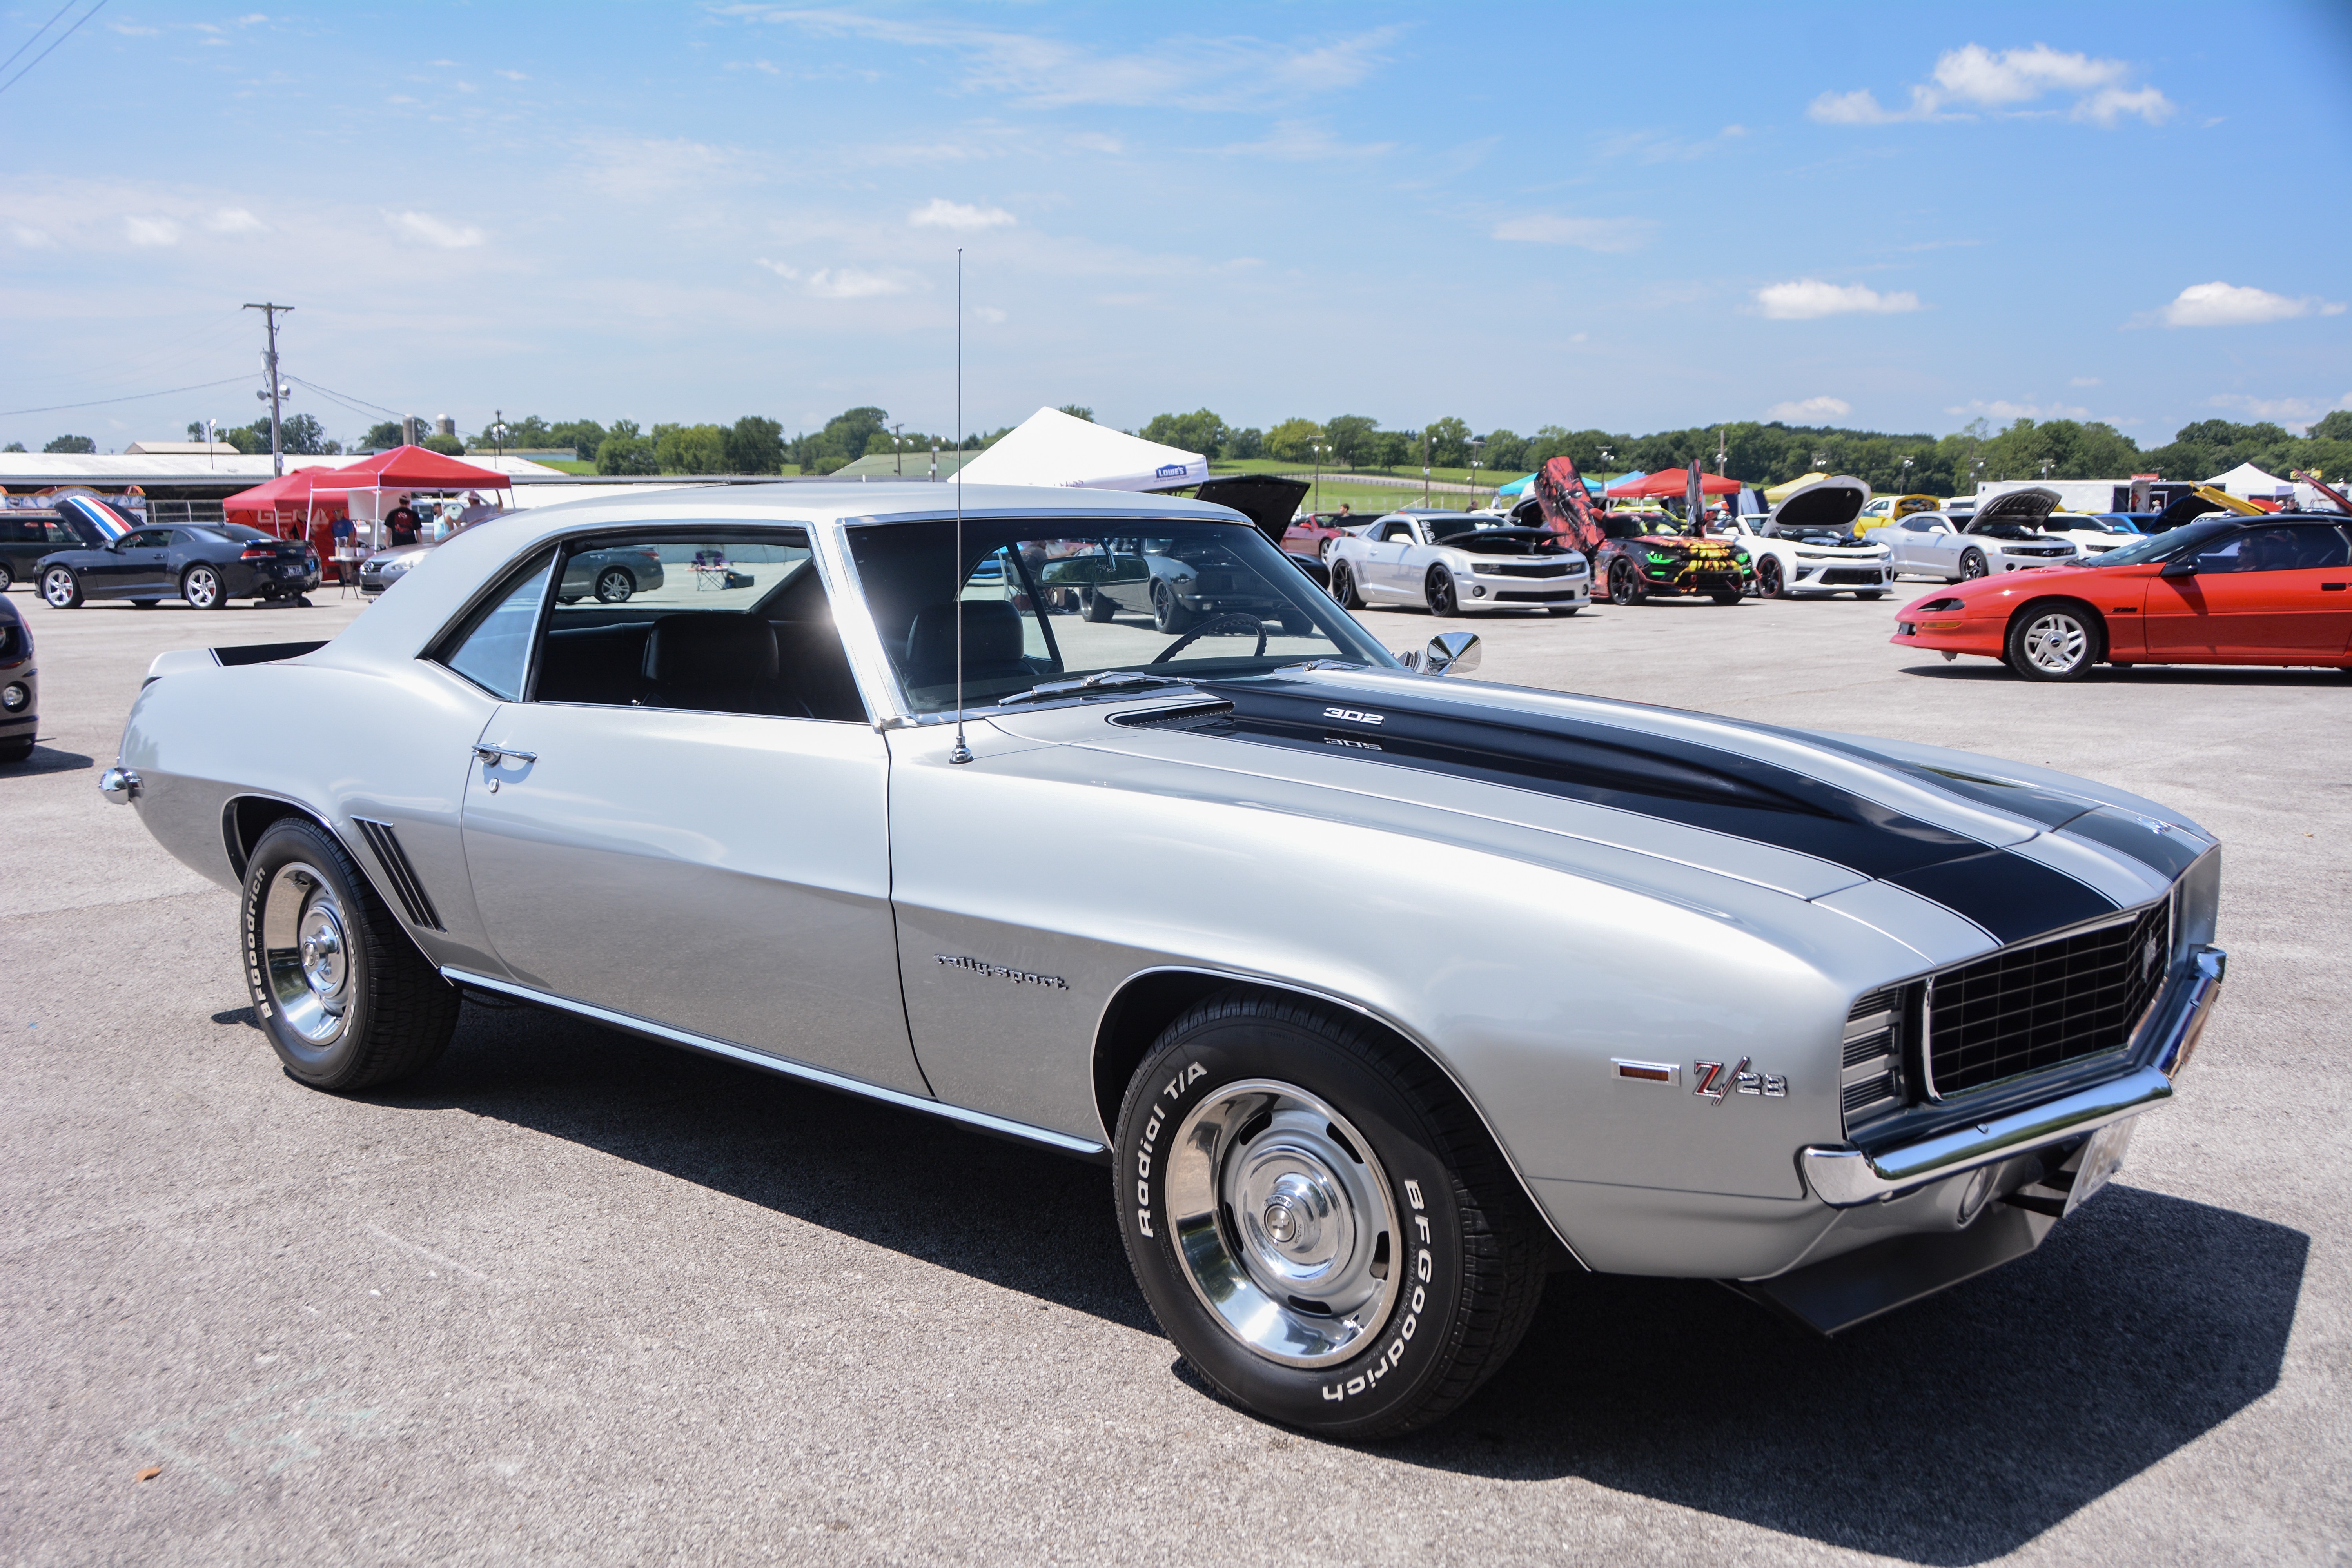 Camaro Fest Offers An Action-Packed Weekend Of Chevrolet Muscle